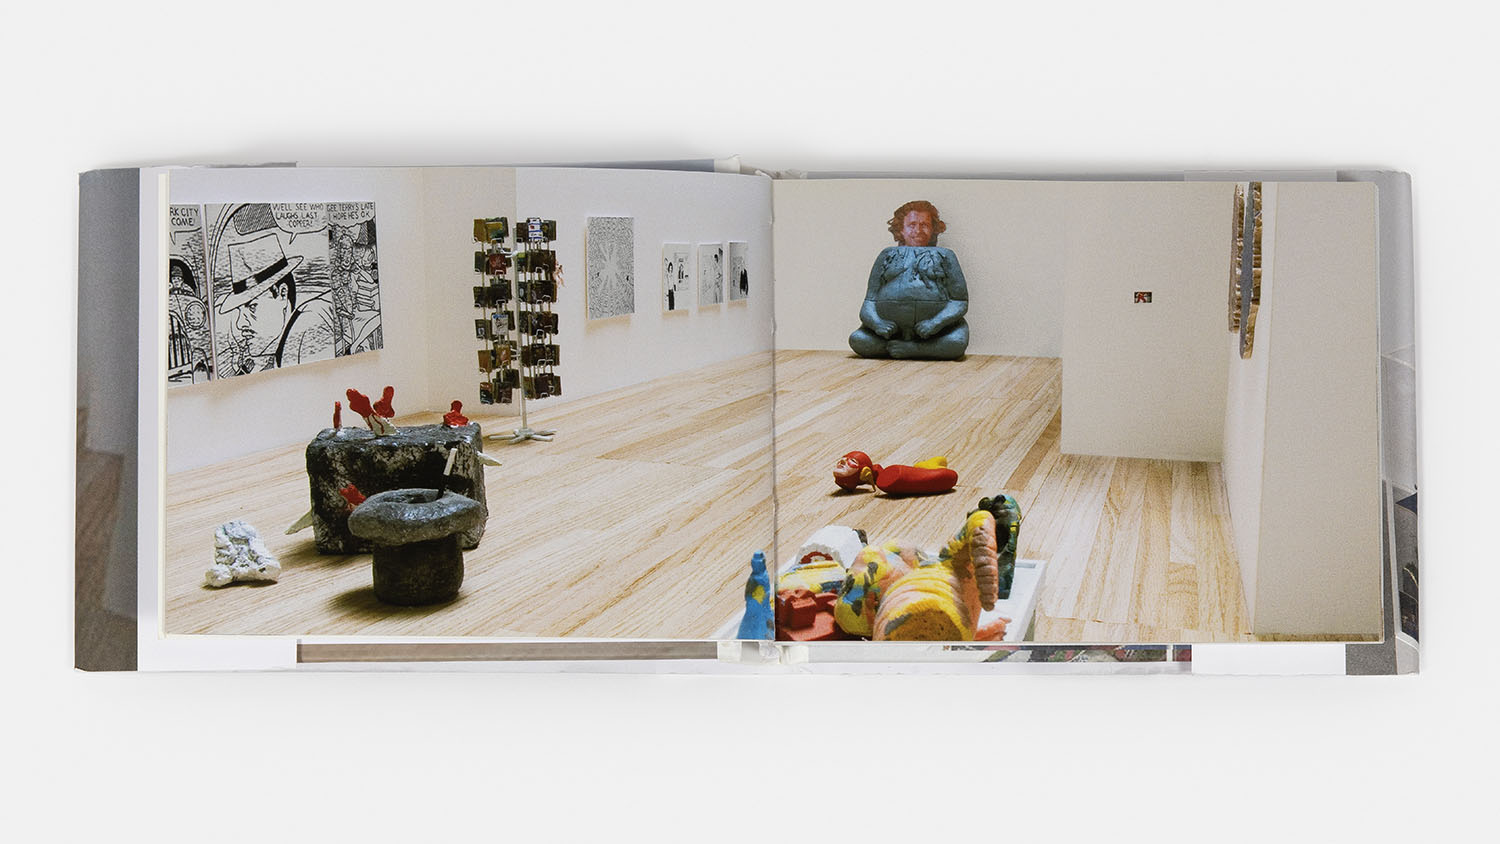 Dream Object Book, 2011 - Additional view